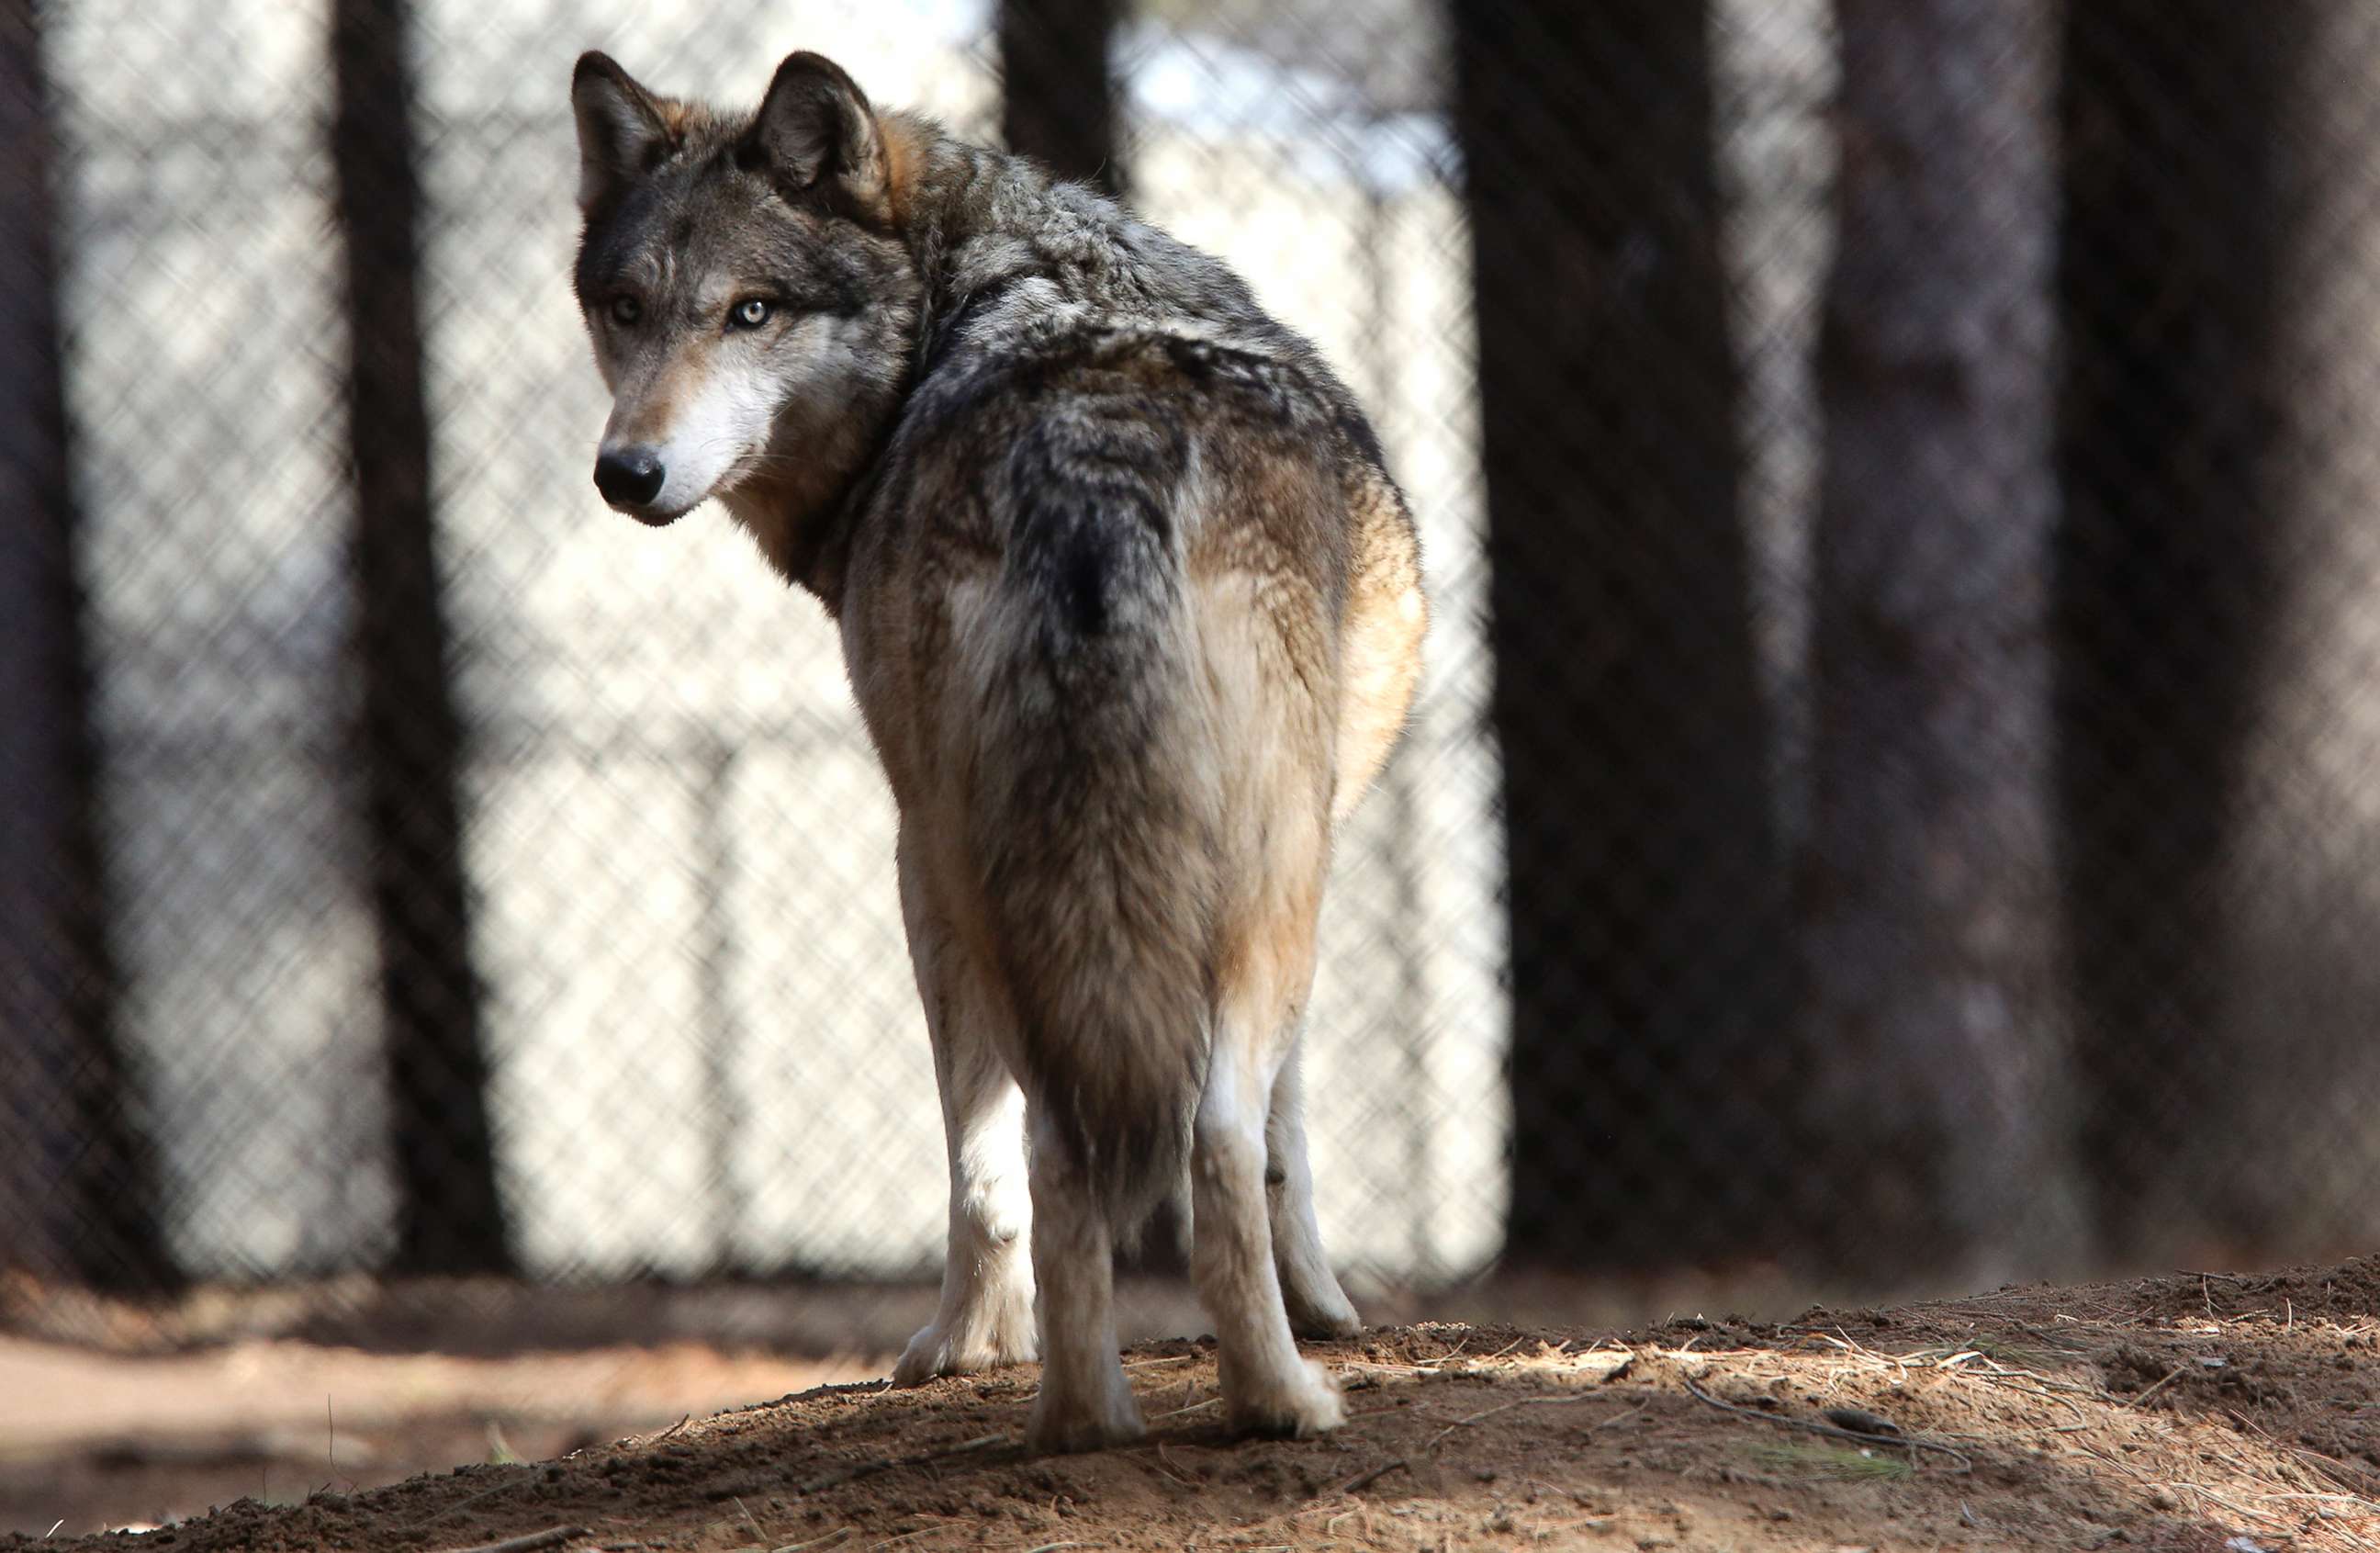 PHOTO: In this April 11, 2018 photo, a grey wolf stands at the Osborne Nature Wildlife Center south of Elkader, Iowa.